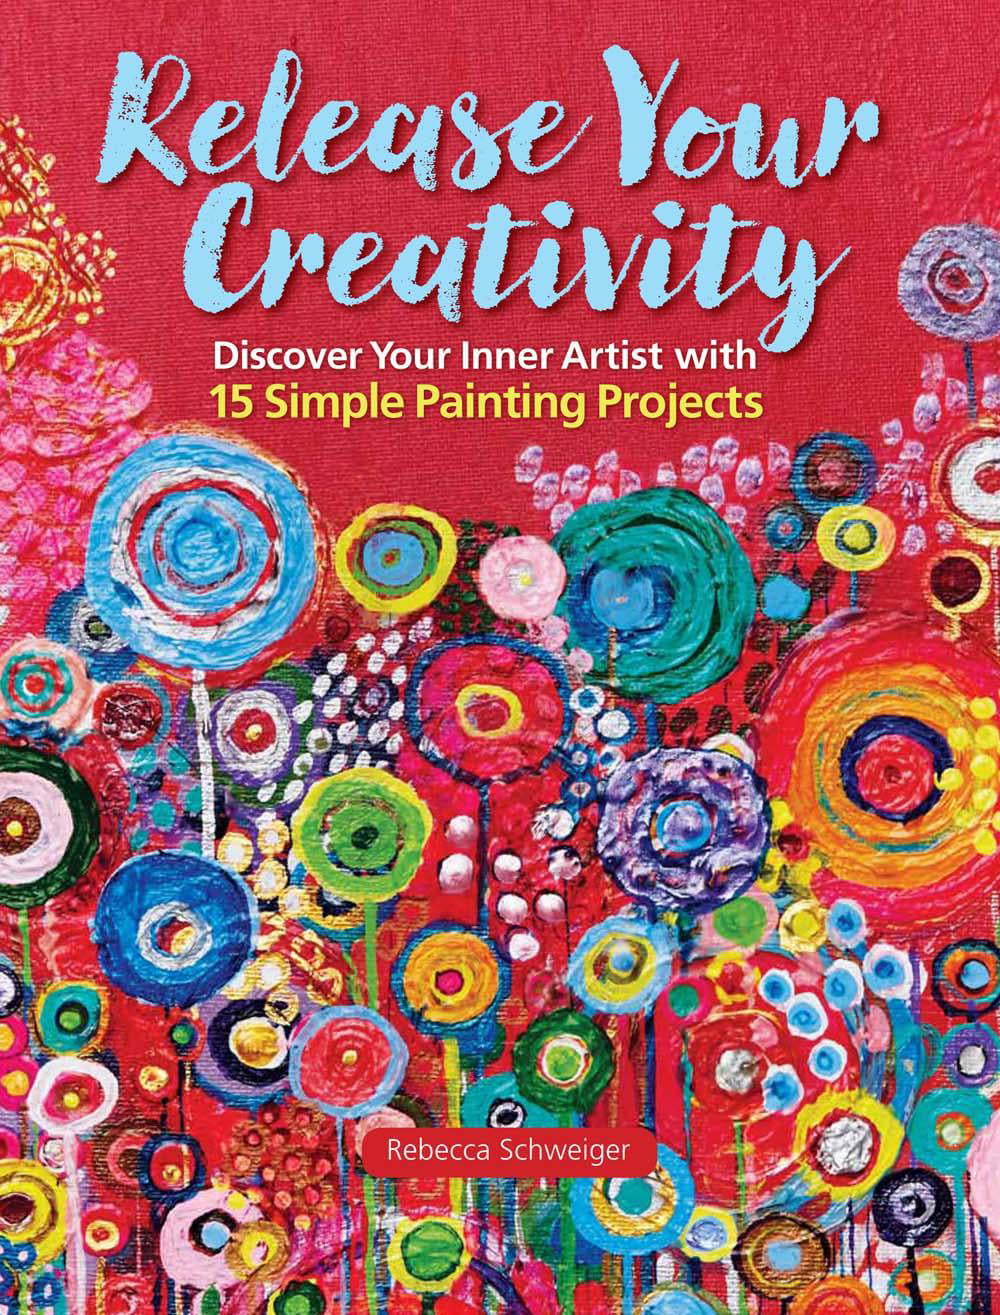 Release Your Creativity Discover Your Inner Artist with 15 Simple
Painting Projects Epub-Ebook